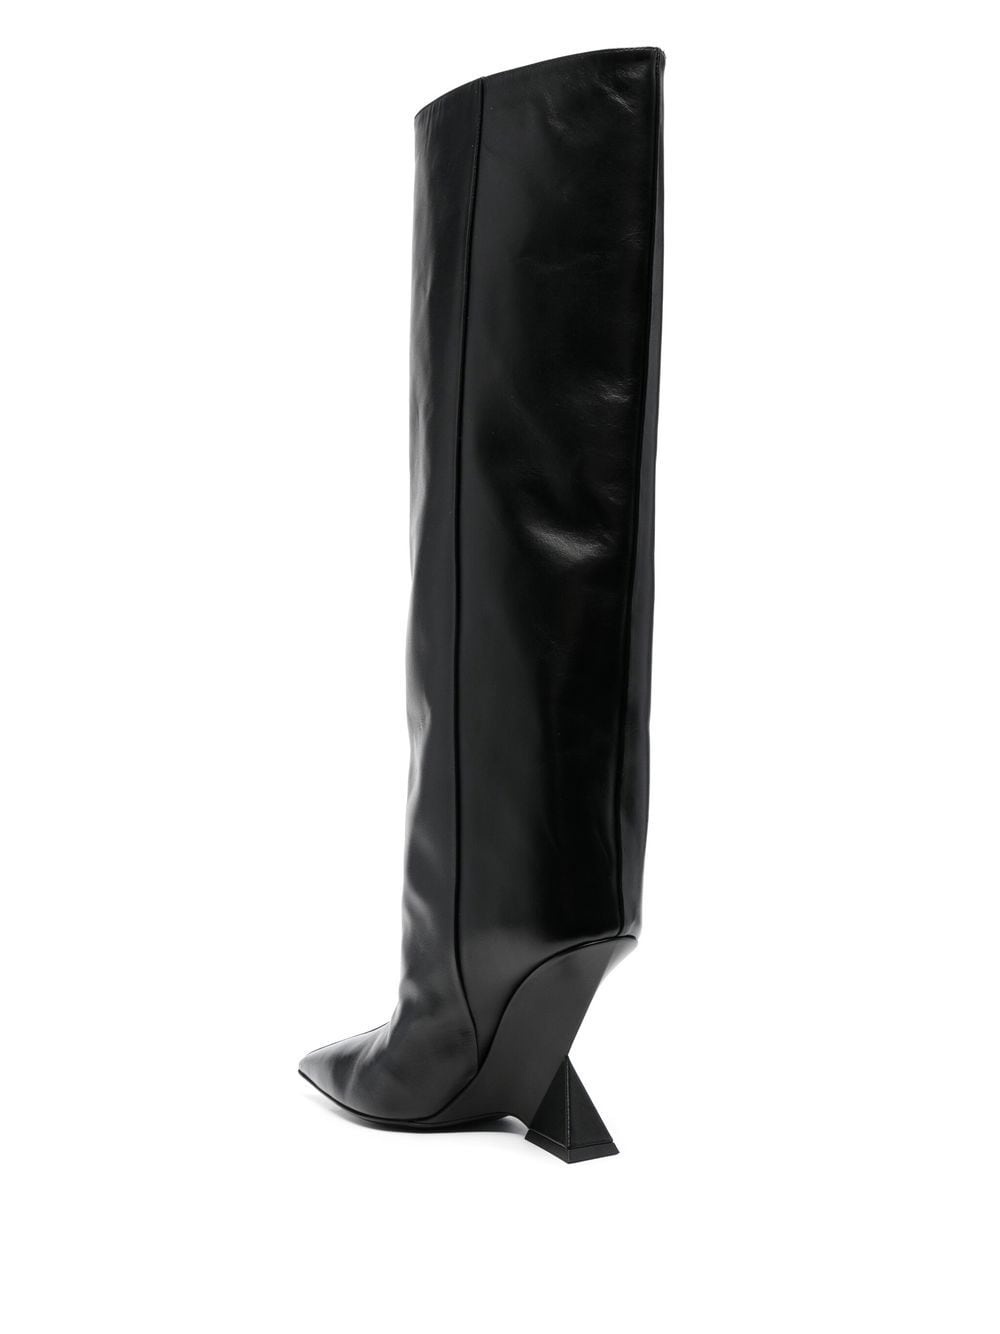 CHEOPE CALF LEATHER TUBE BOOT 105mm - 3